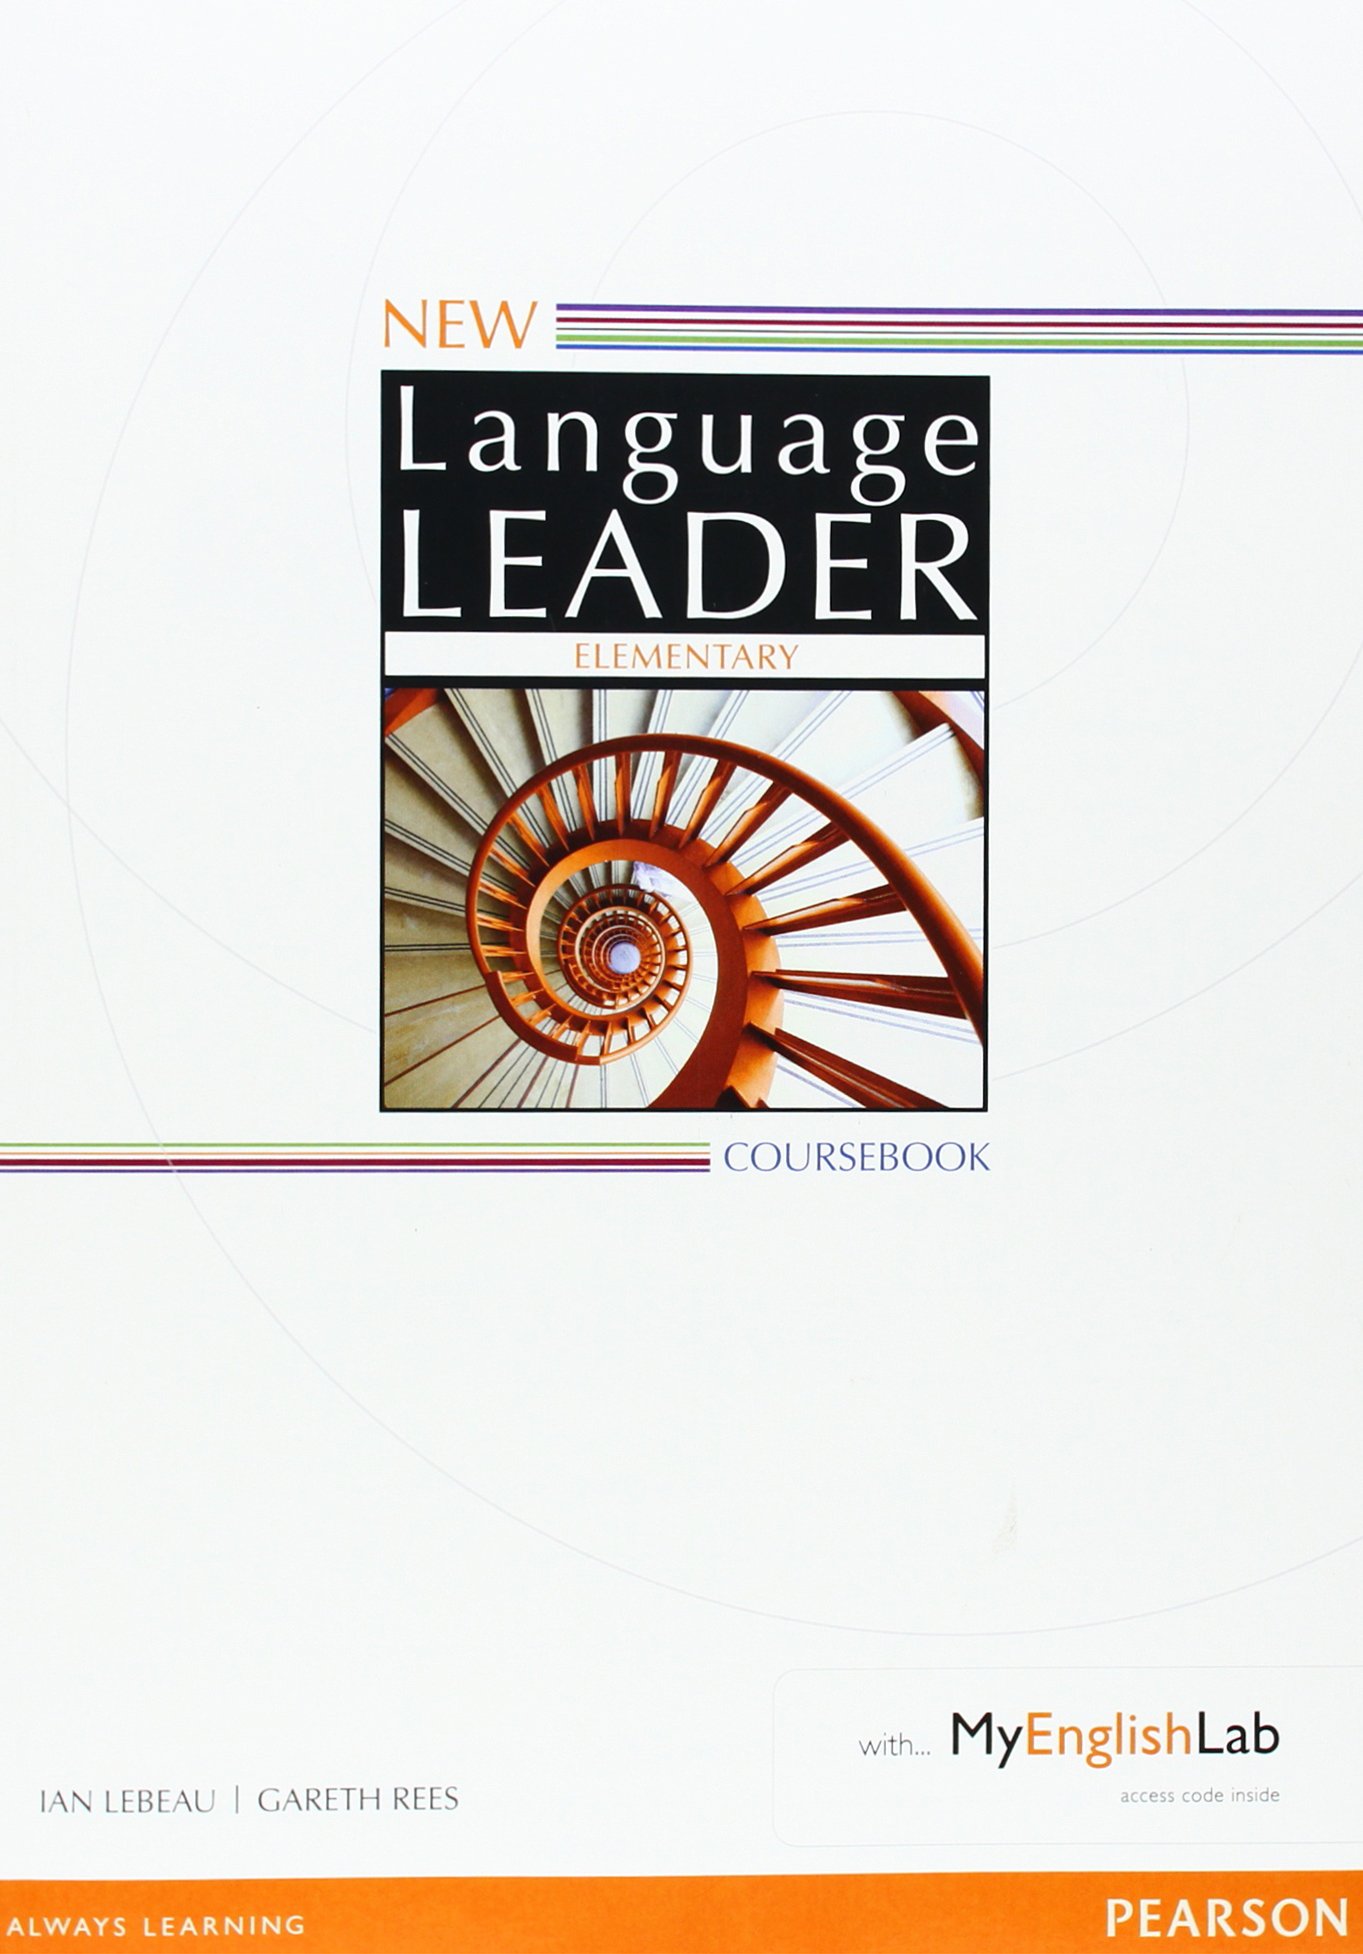 NEW LANGUAGE LEADER ELEMENTARY Student's  Book+My lab